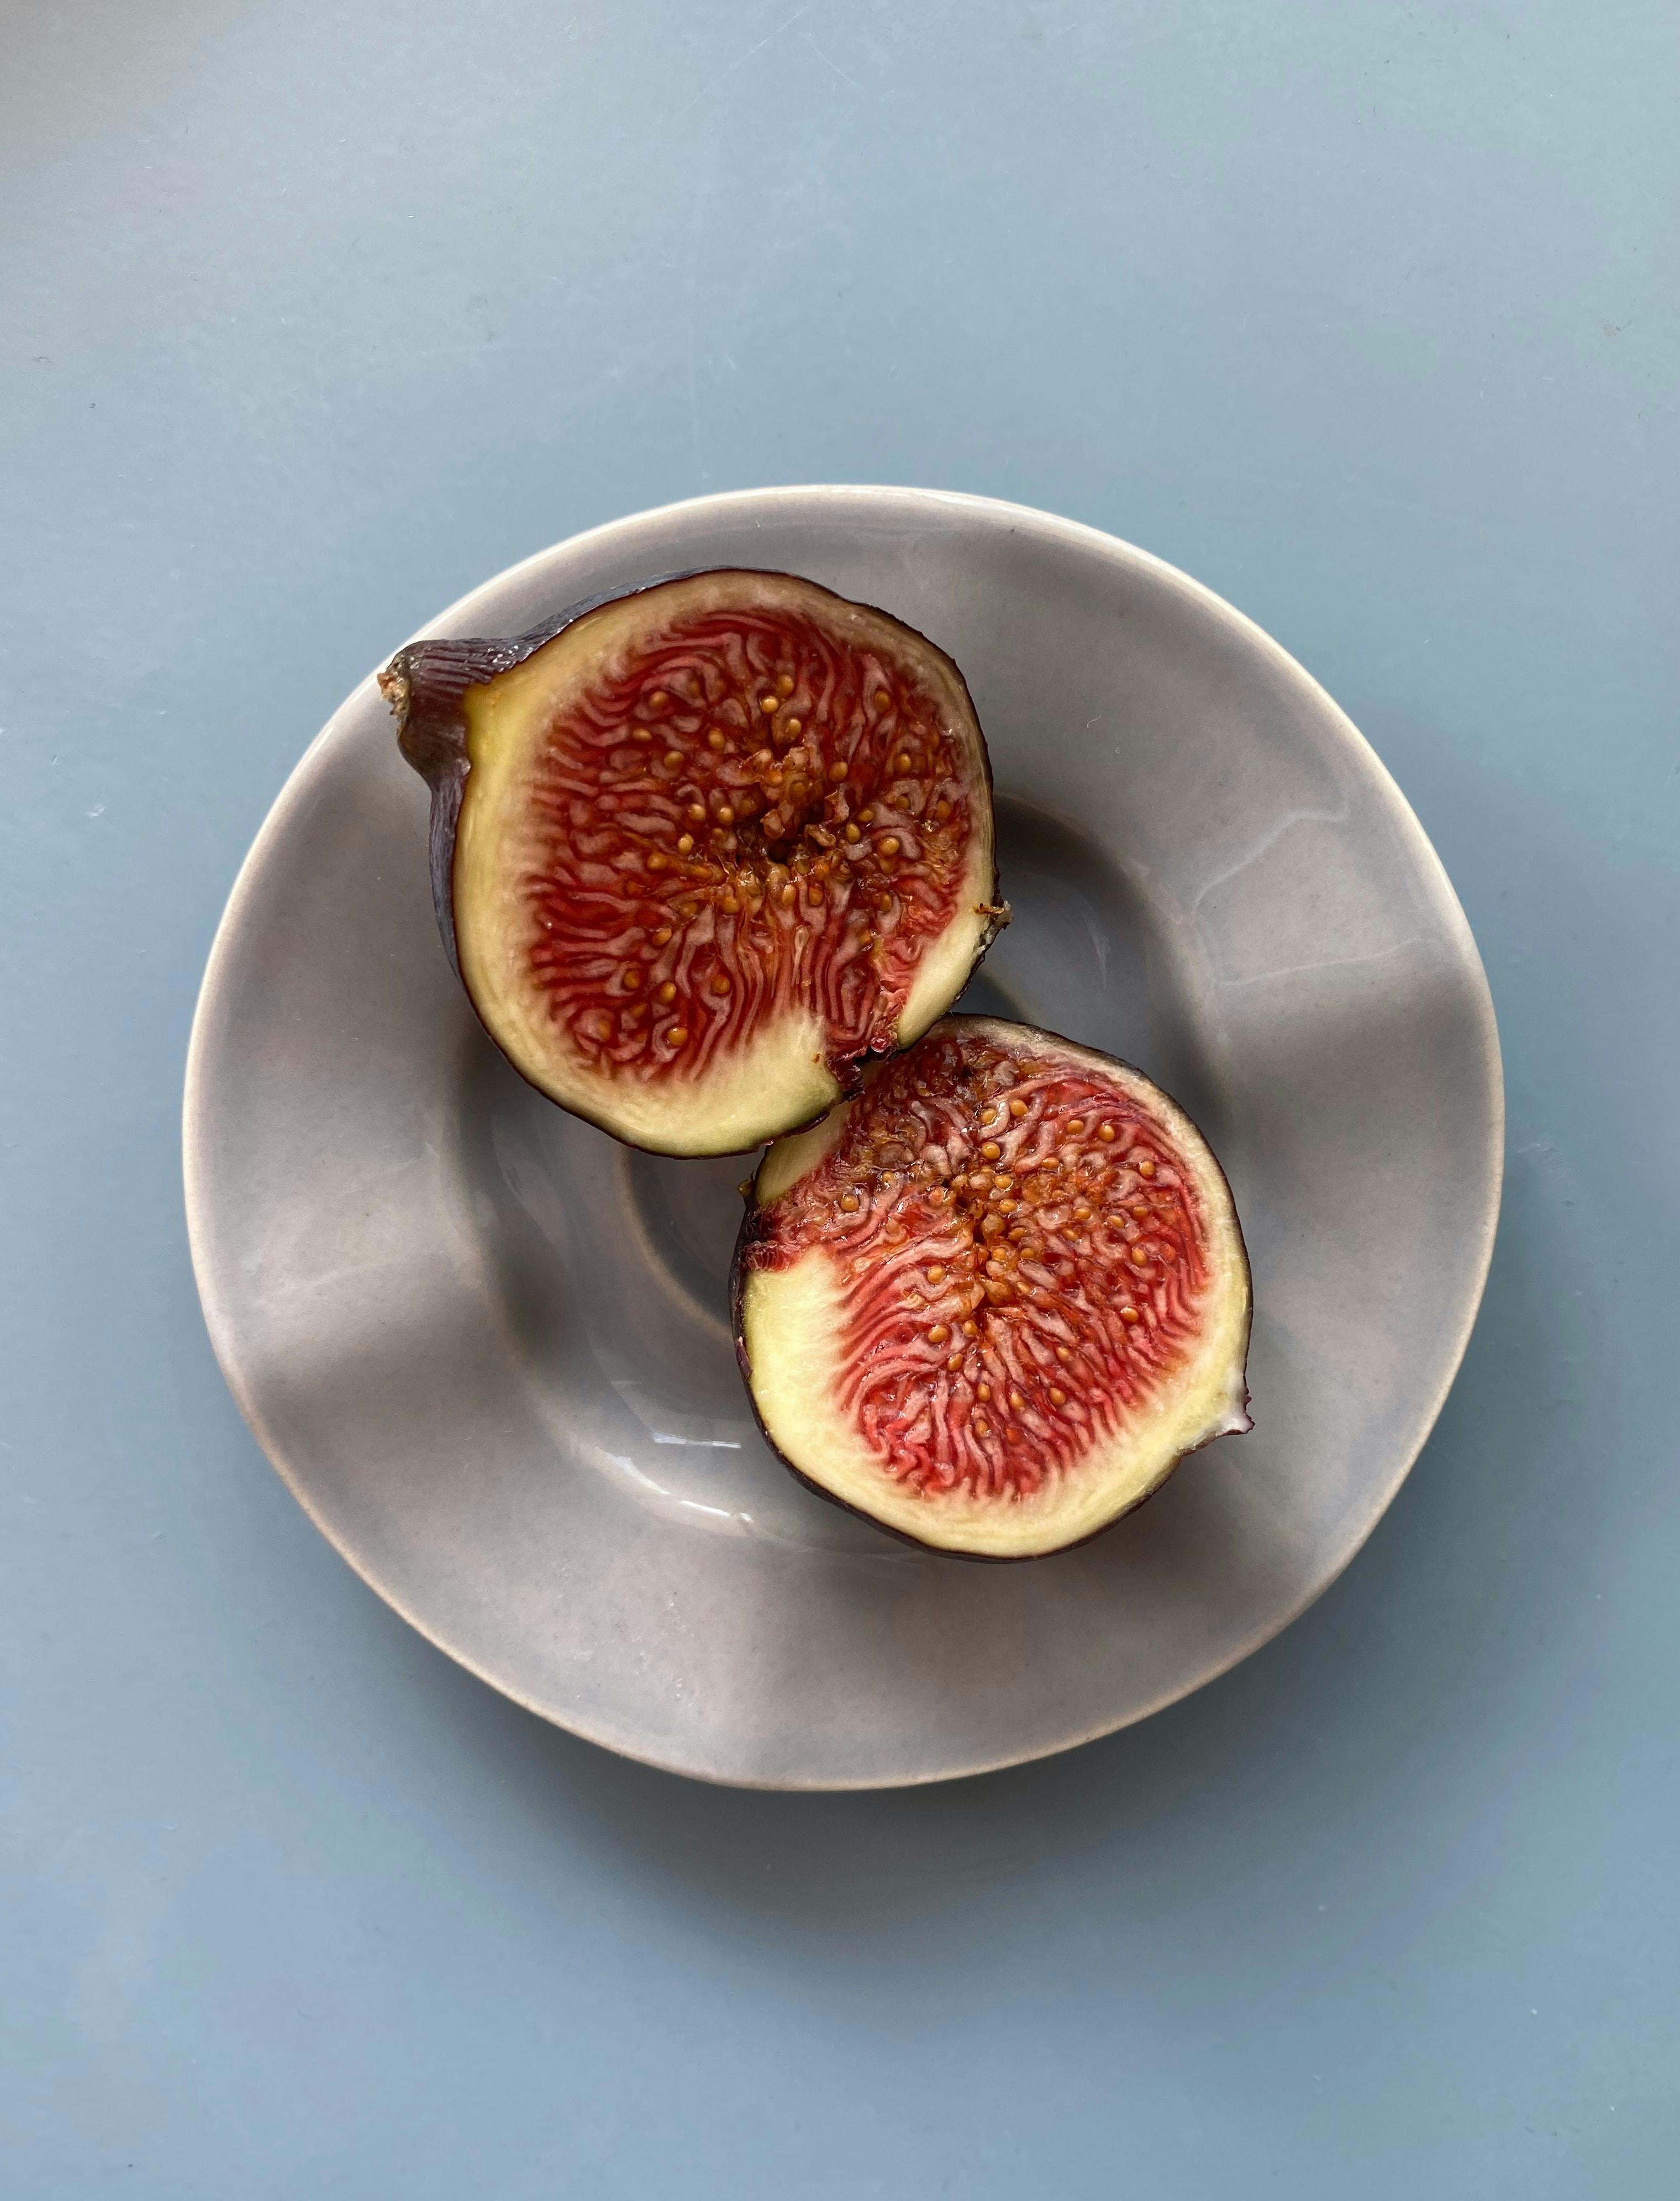 Are there dead in figs? How figs are grown | Oddbox